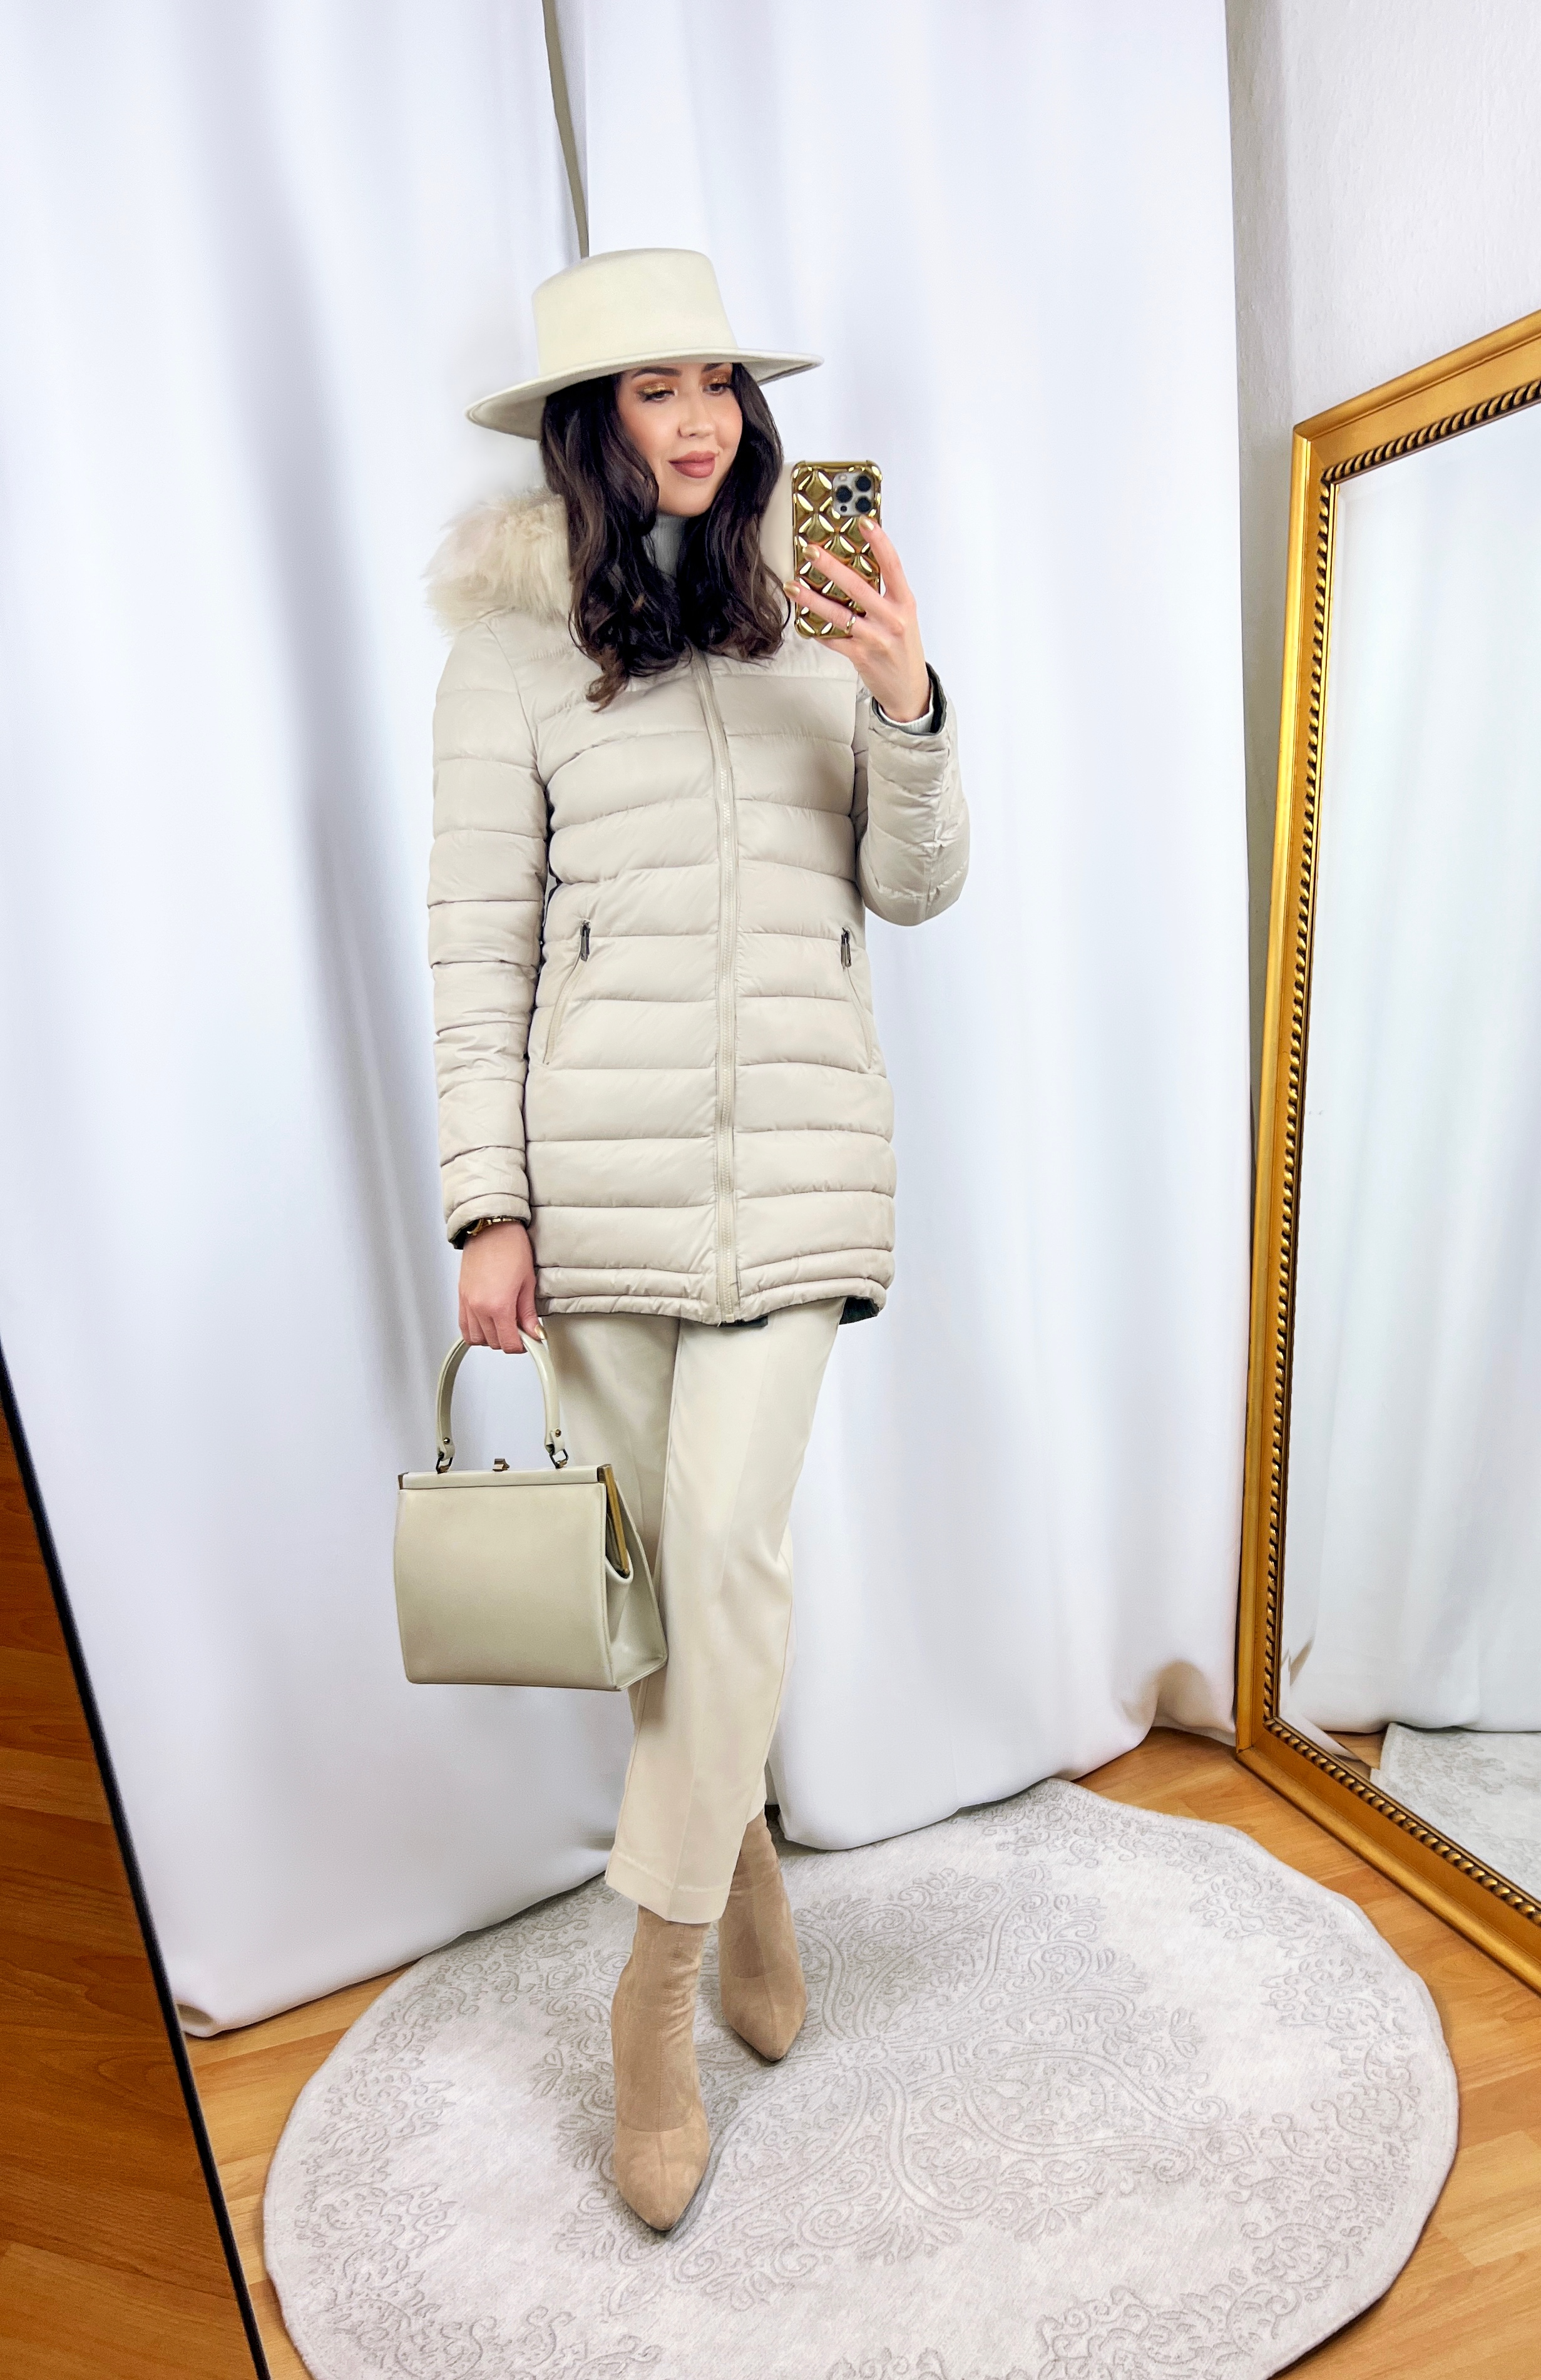 Beige Brim Hat Outfit for Winter (Monochrome)